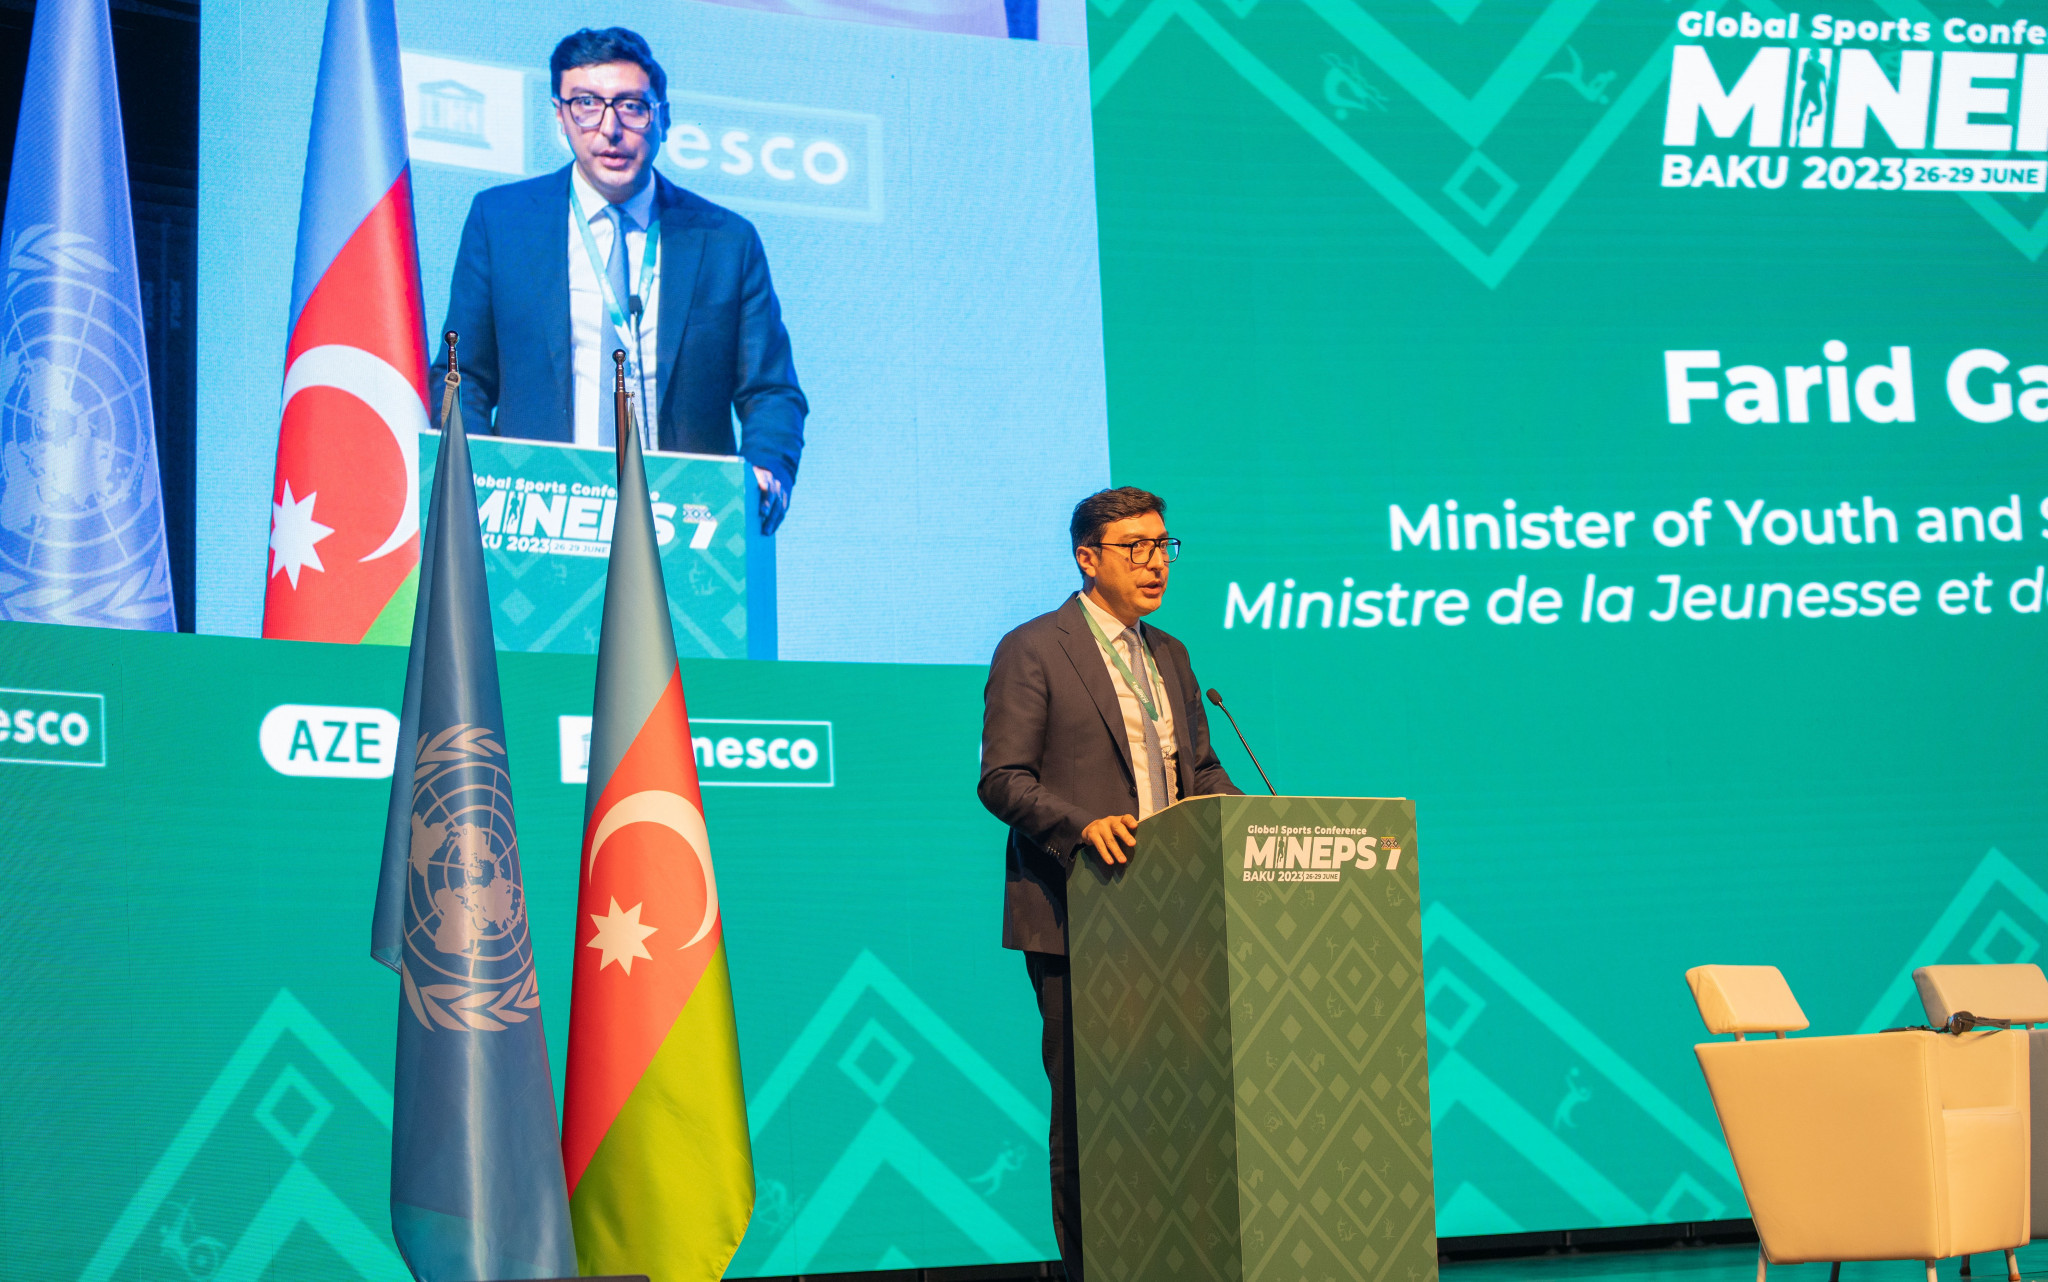 Azerbaijan's Minister of Youth and Sport Farid Gayibov welcomes delegates to the Multistakeholder Forum before the official start of MINEPS VII ©Baku 2023